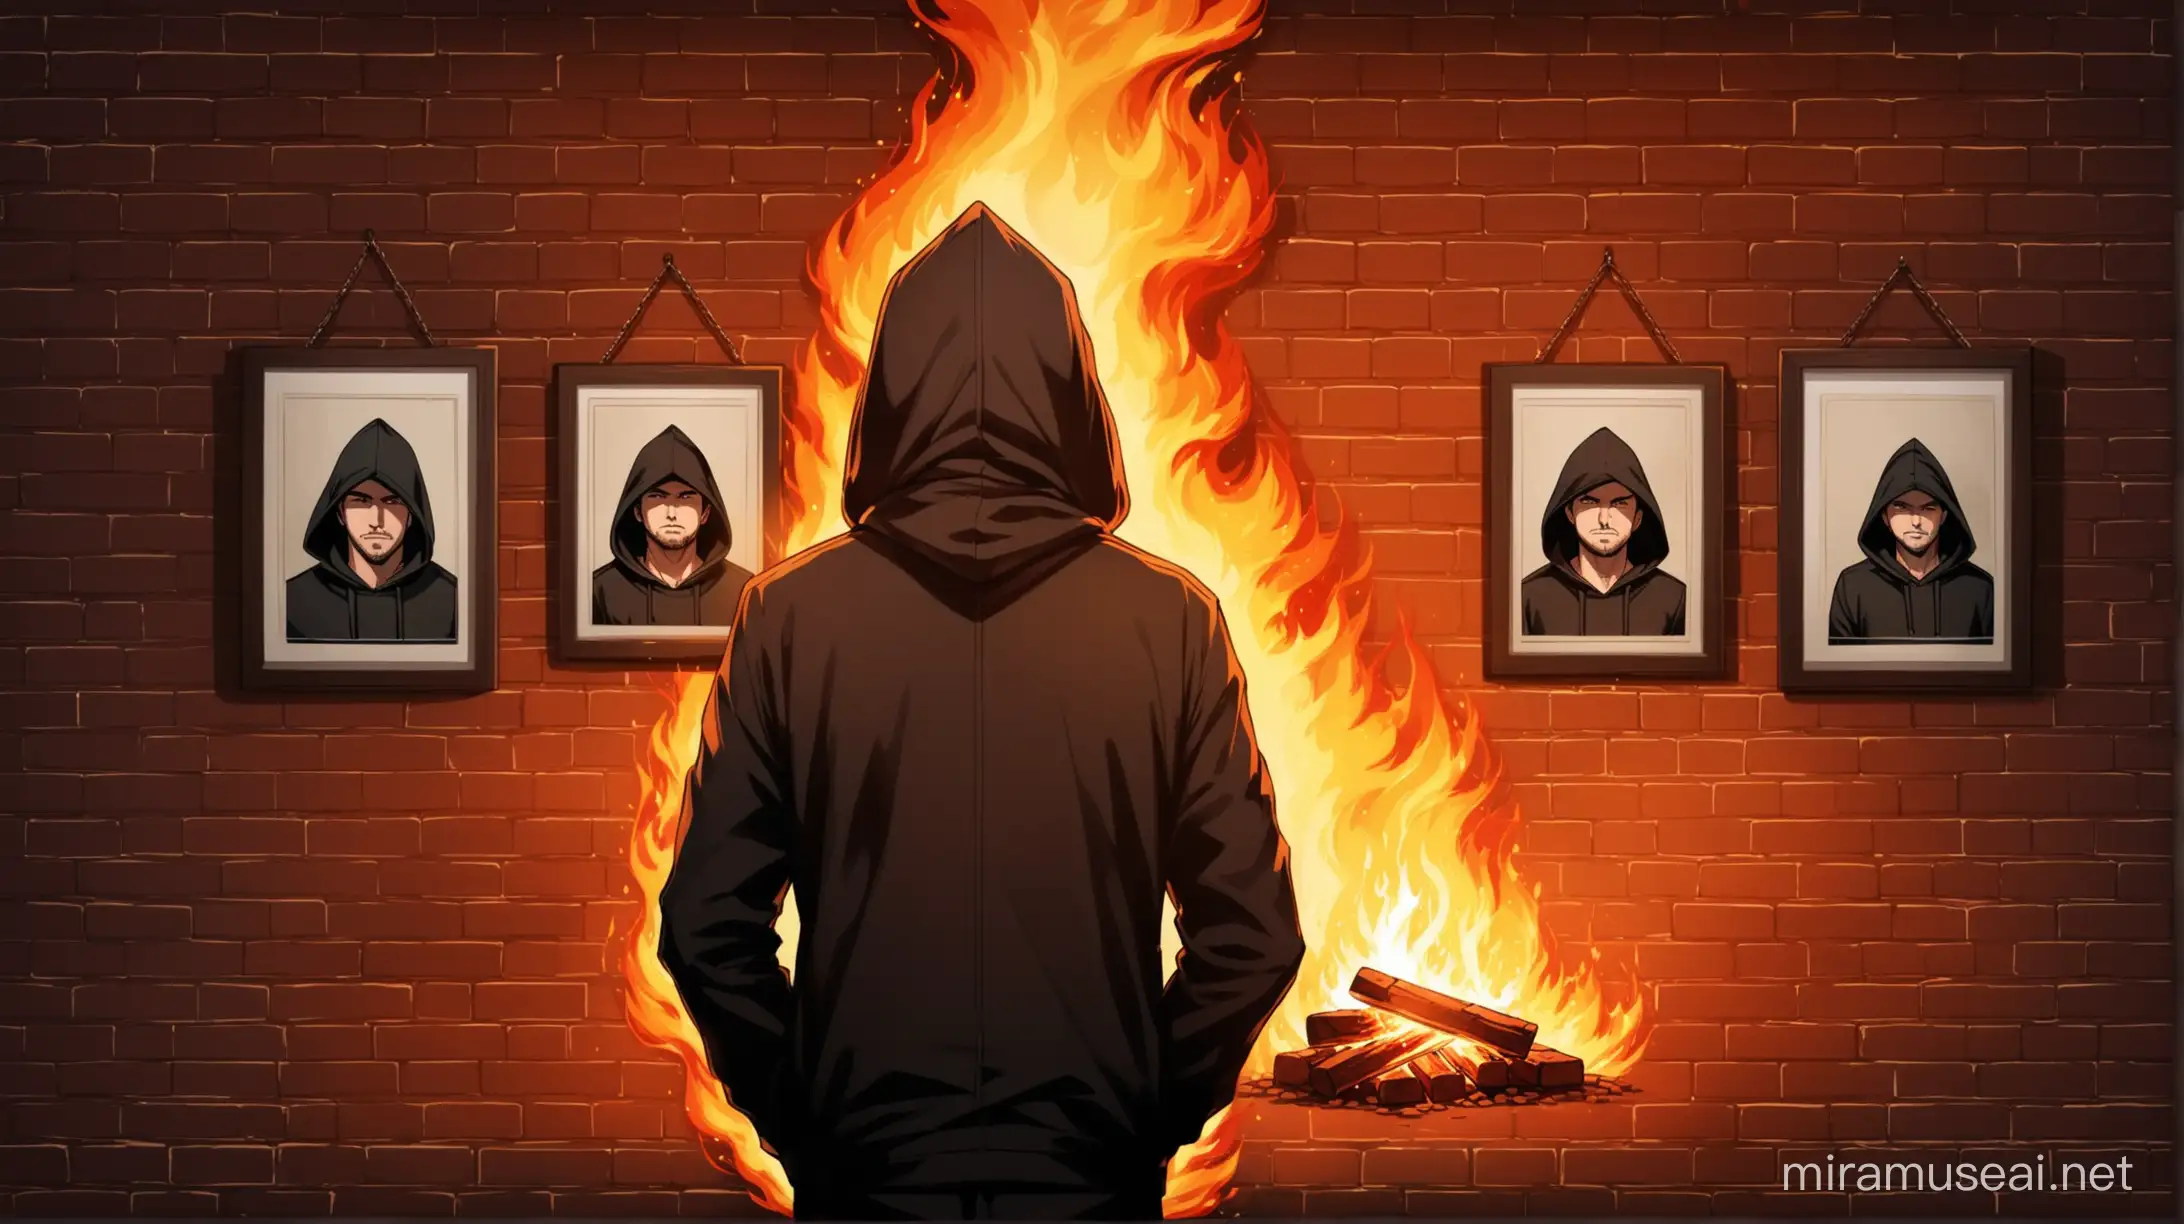 brick wall with framed images hanging on it and on each image there is a man wearing a hood. fire is burning in front of the wall